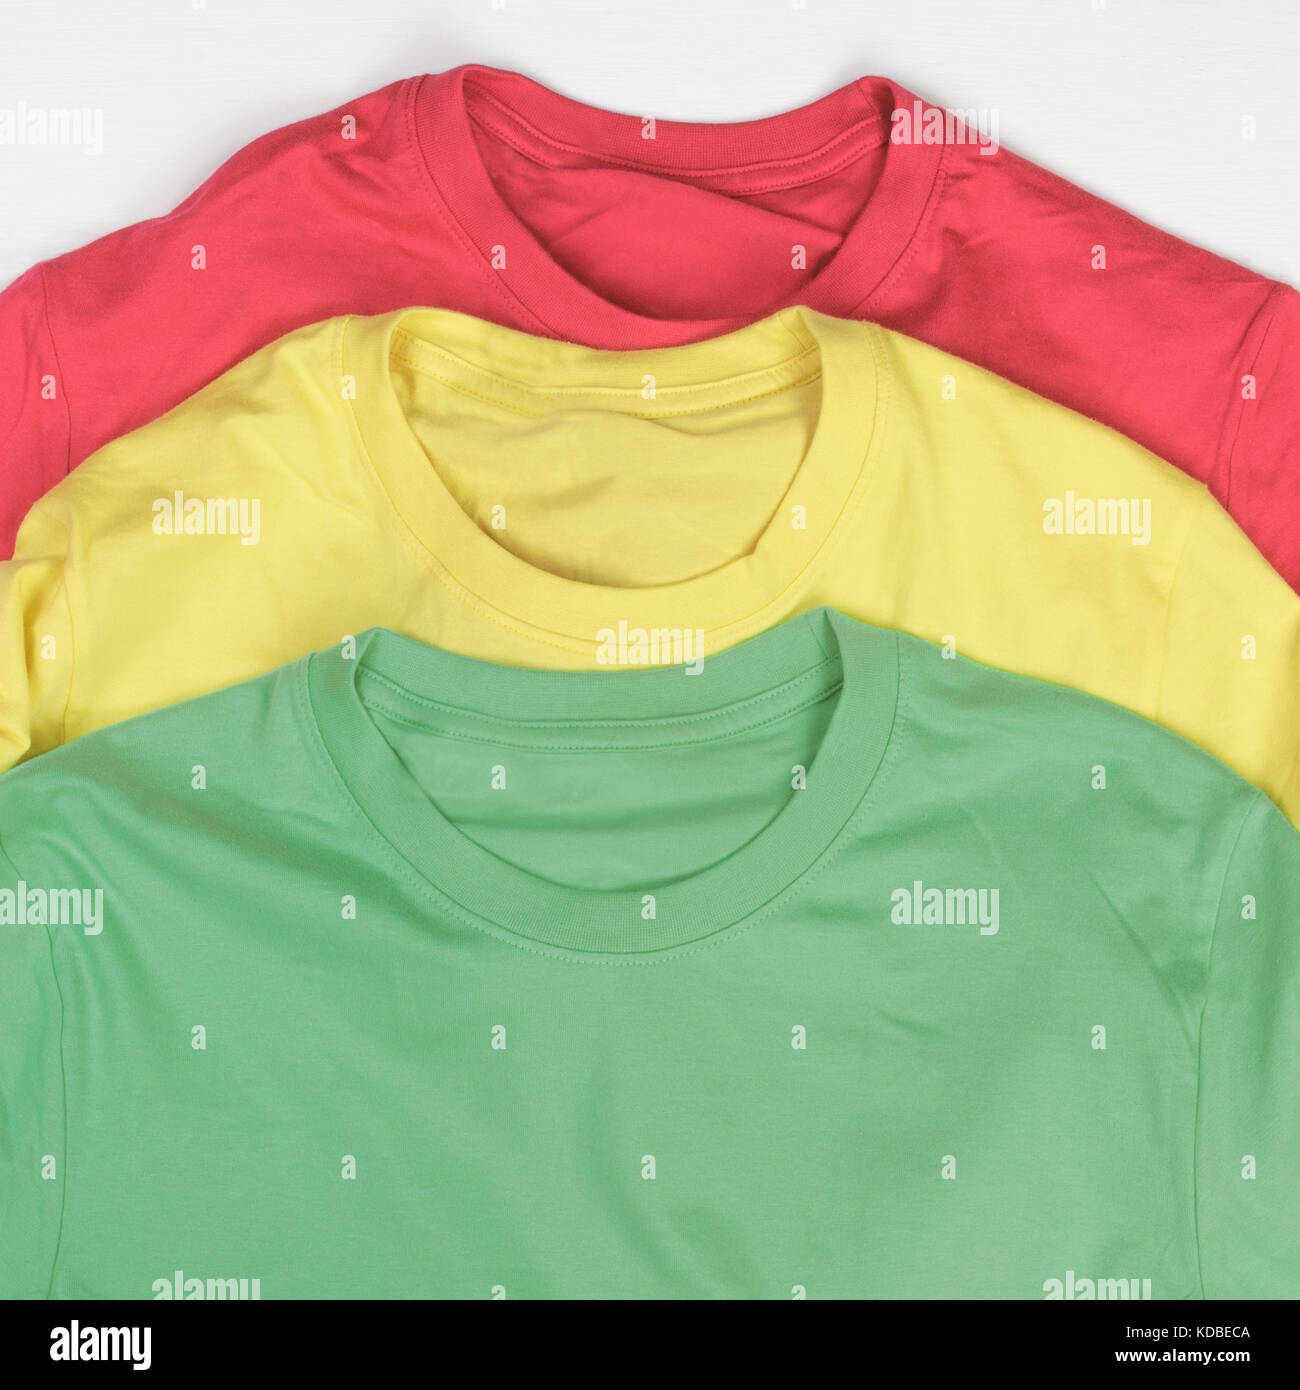 Green Tshirt High Resolution Stock Photography and Images - Alamy